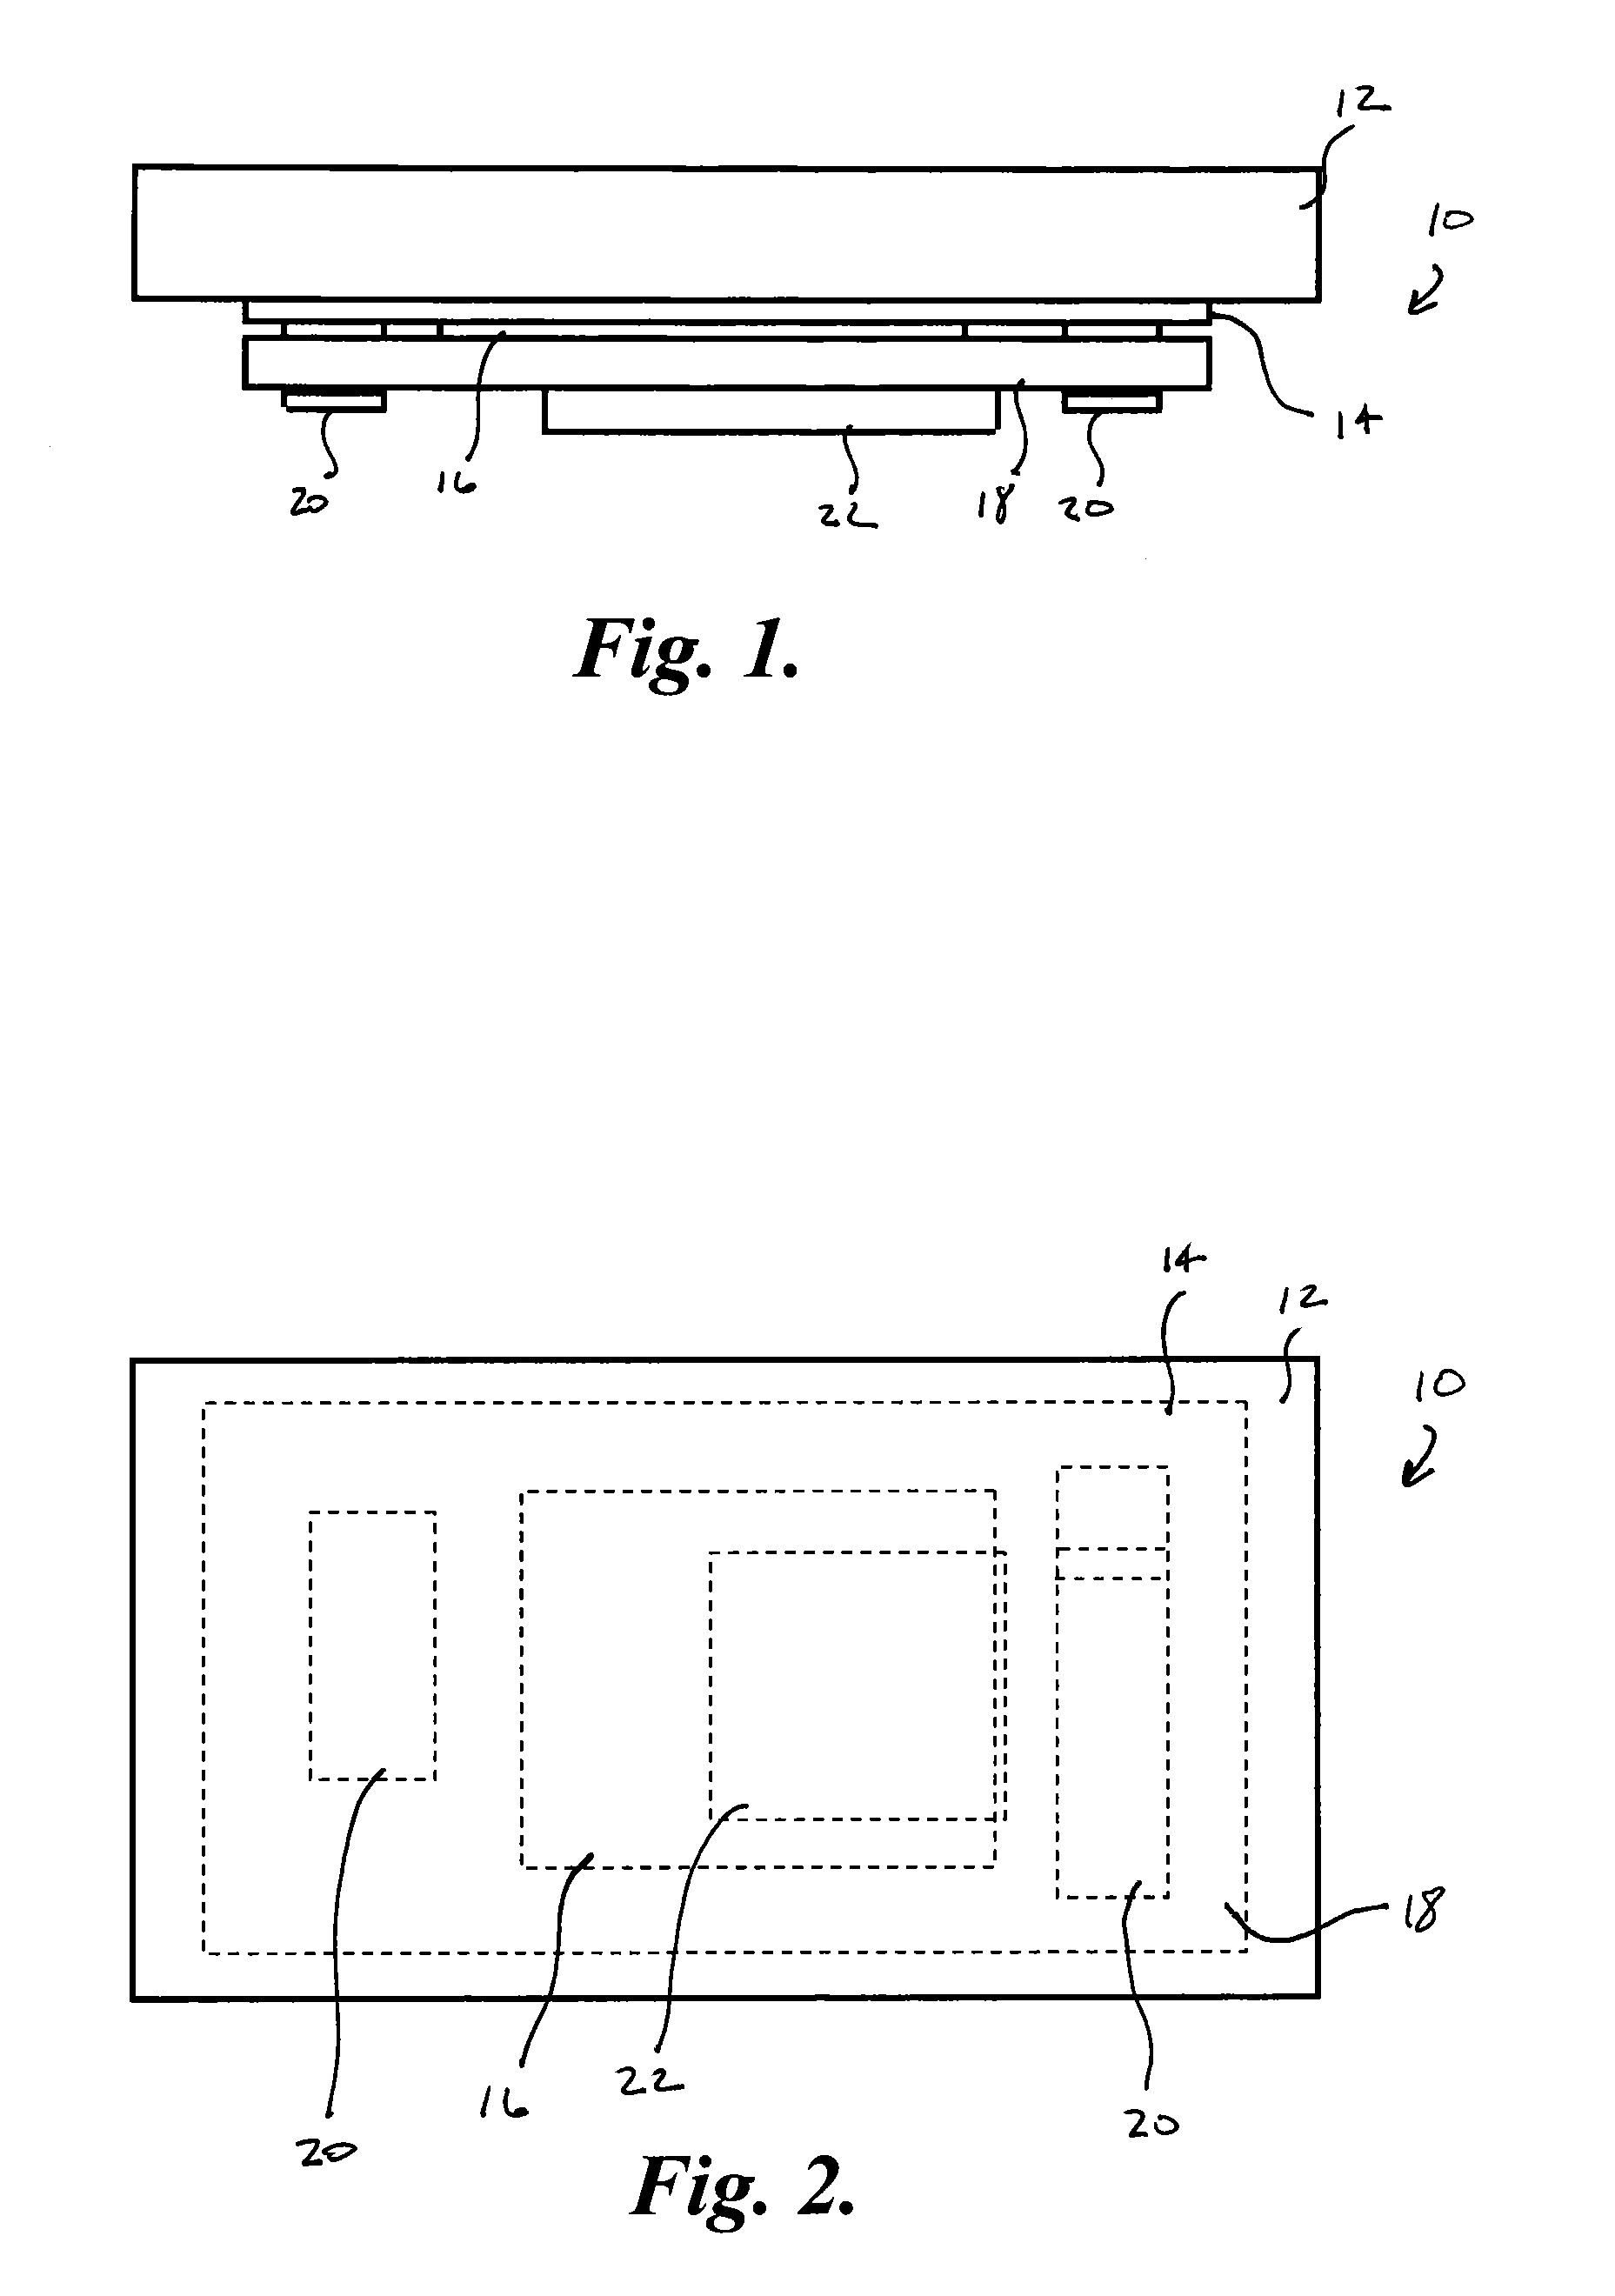 Capacitive touch screen having dynamic capacitance control and improved touch-sensing